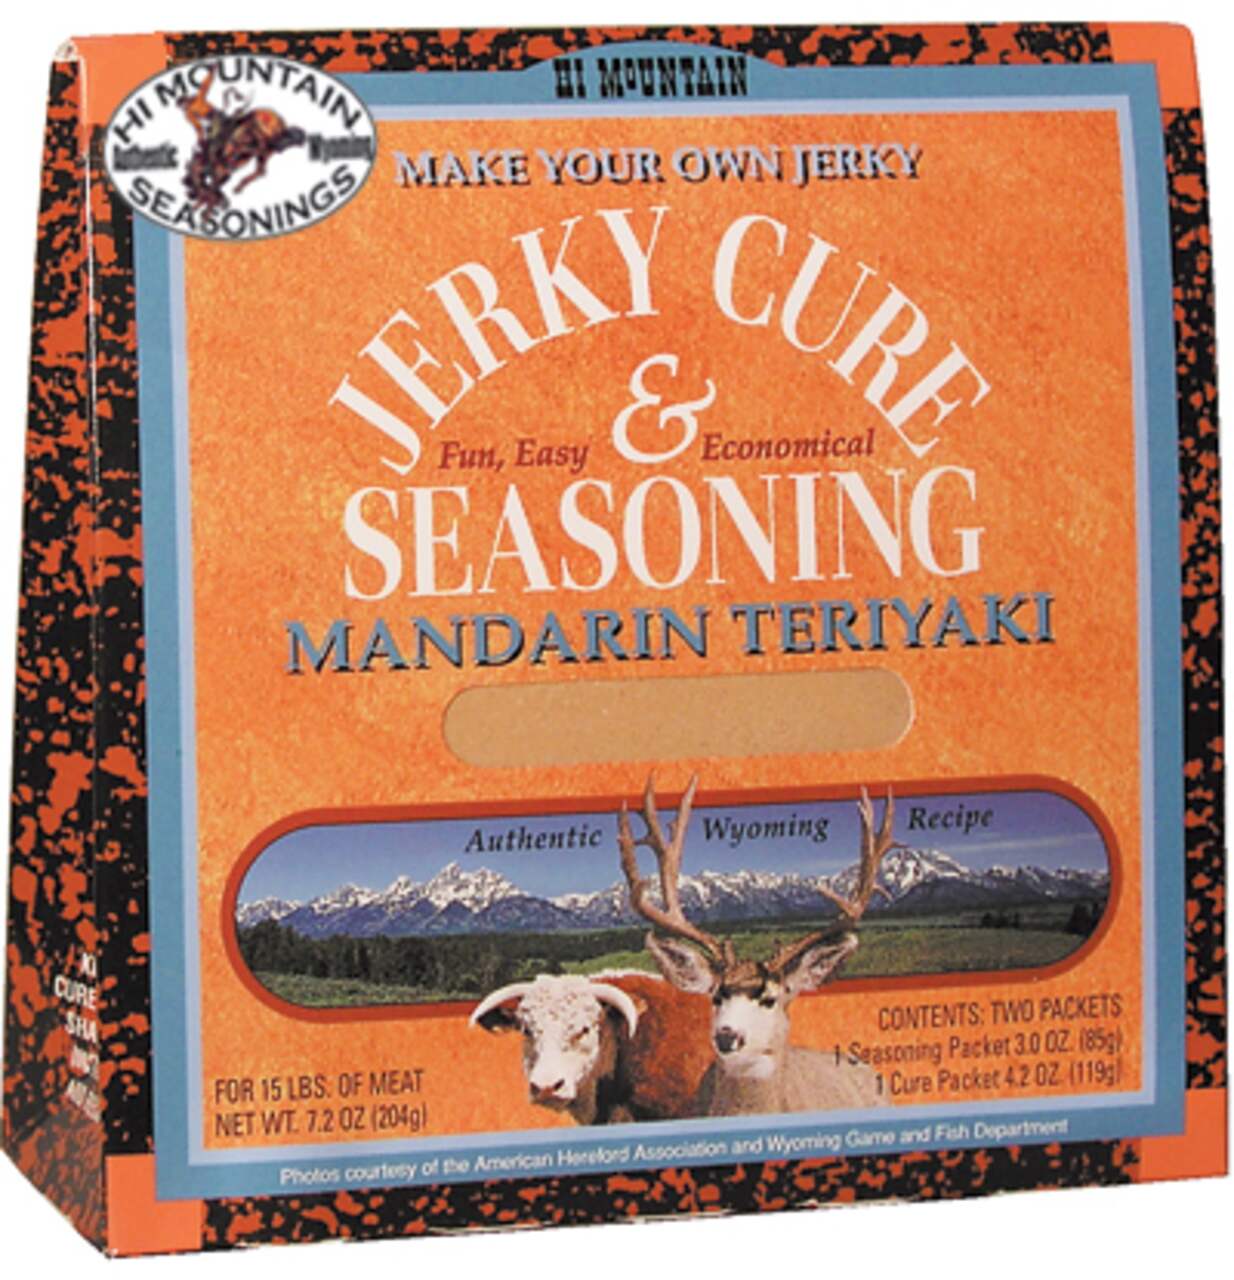 https://media-www.canadiantire.ca/product/playing/hunting/hunting-accessories/3750417/hi-mountain-mandarin-teriyaki-blend-cff908c8-7f72-4c0c-a4f9-a1e3dc137297.png?imdensity=1&imwidth=640&impolicy=mZoom